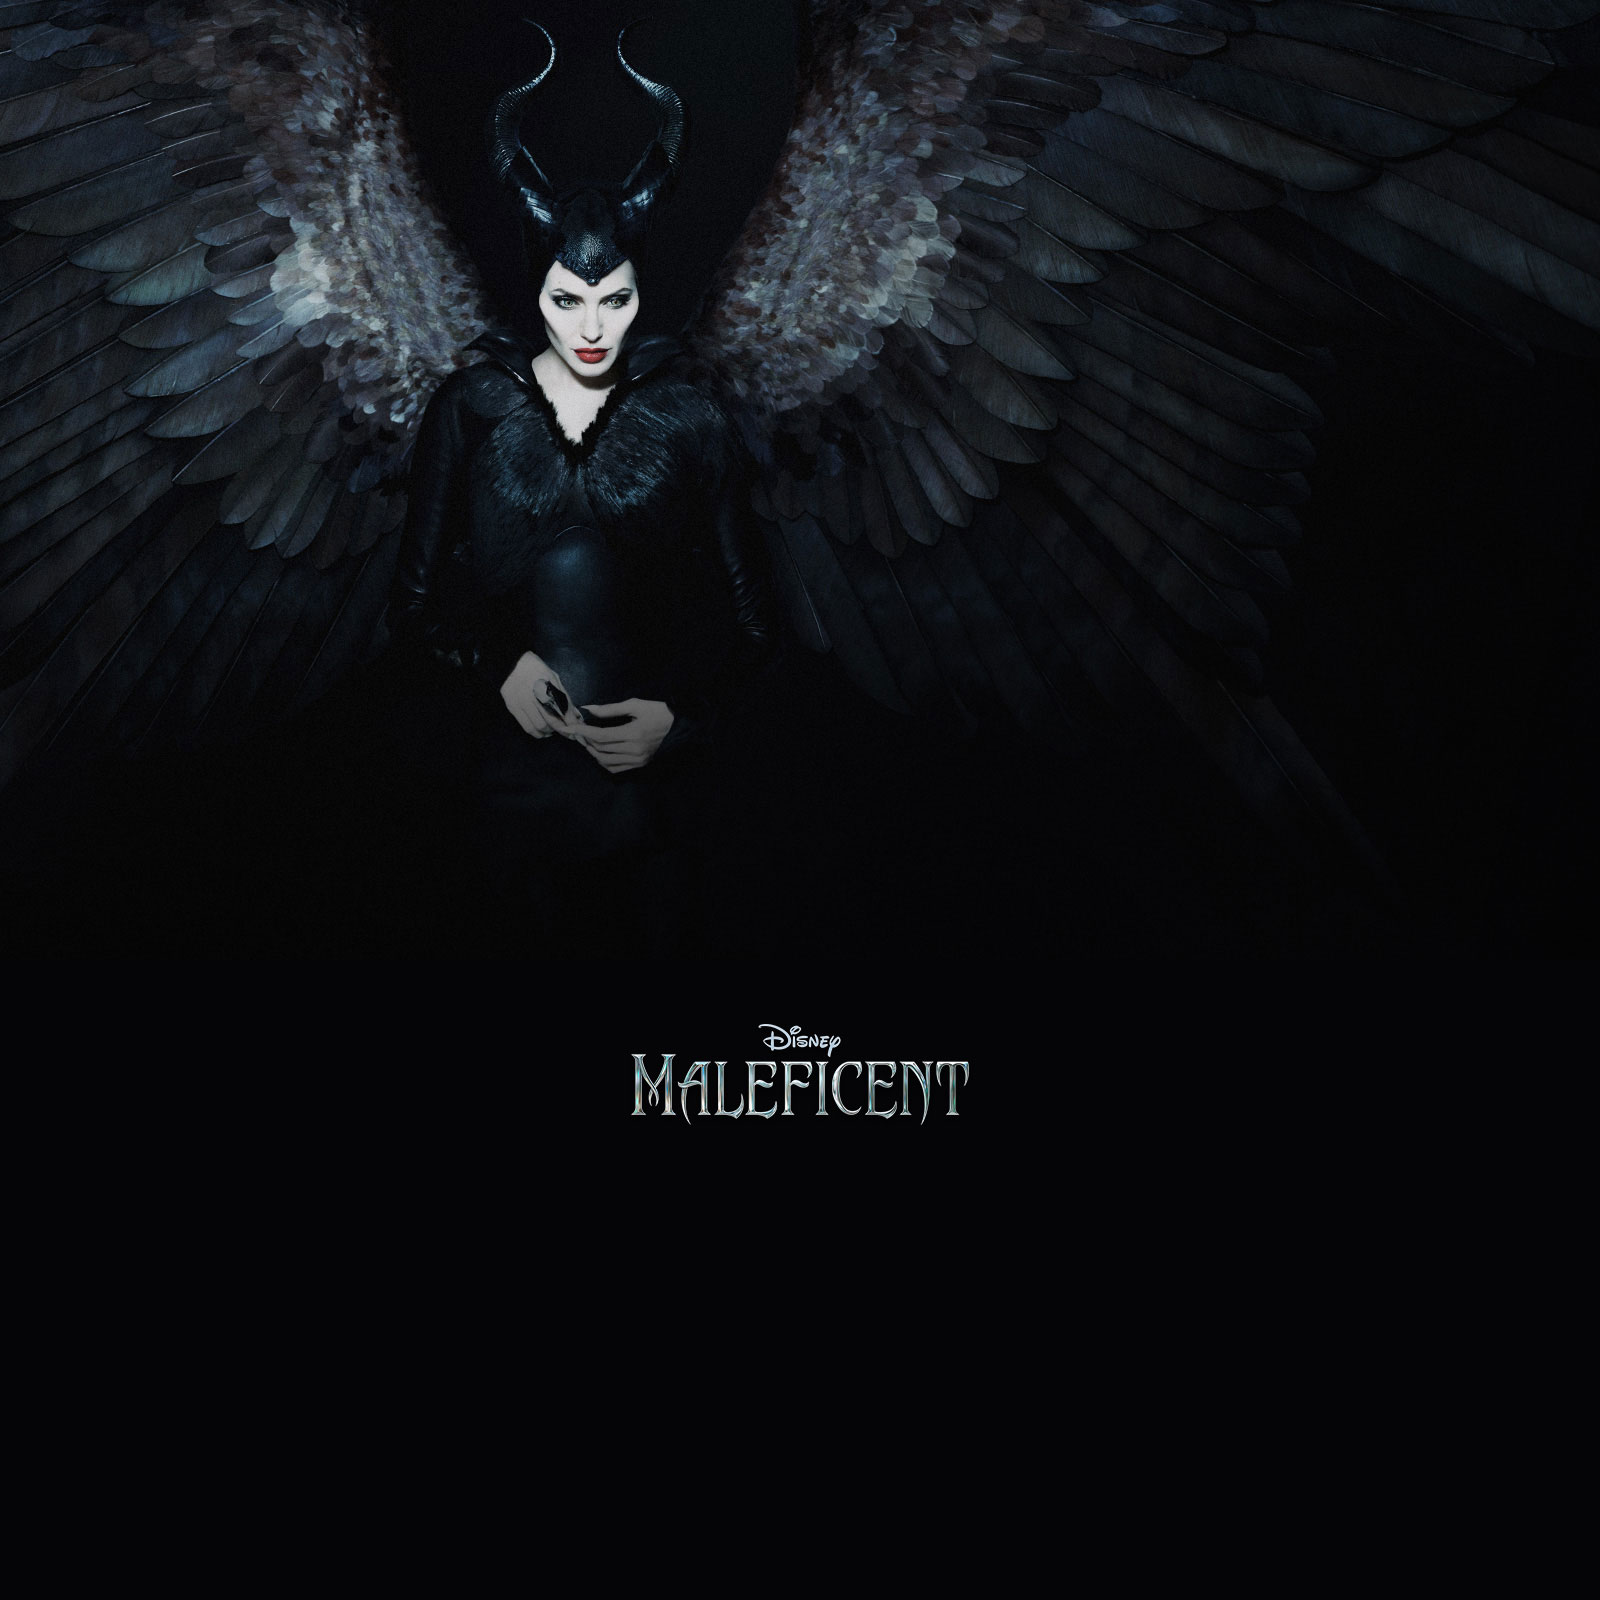 Maleficent Movie HD Wallpaper For iPad iPhone